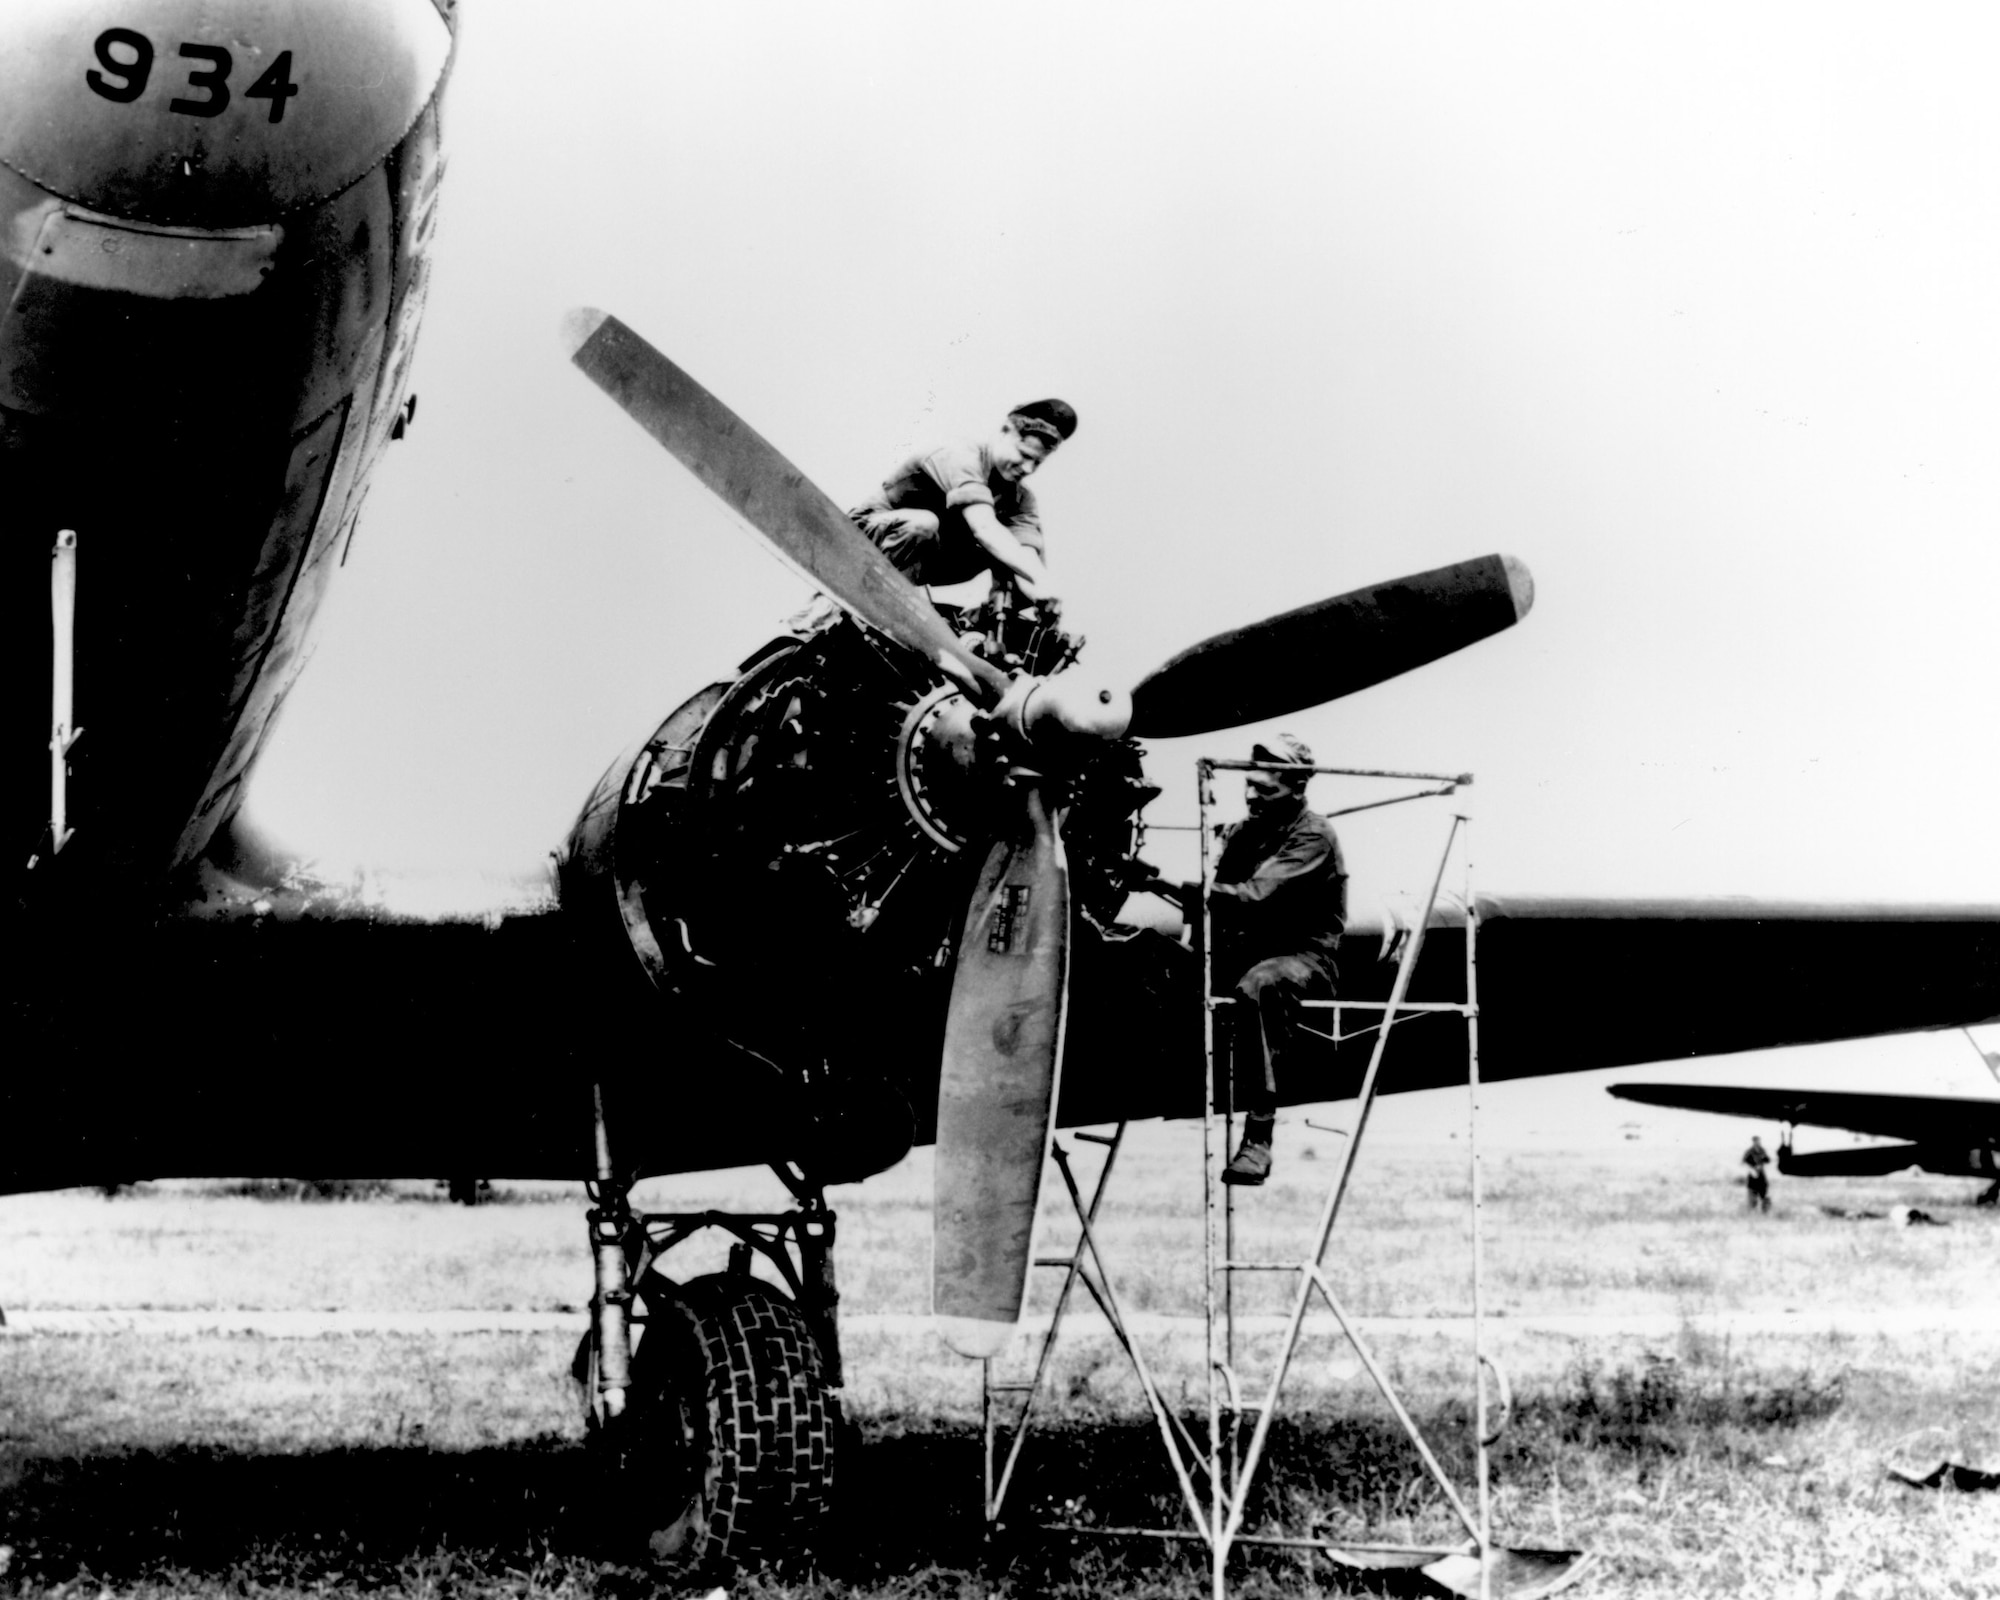 A C-47 Skytrain recevies minor engine repairs during the Berlin Airlift in 1948. (Courtesy photo)